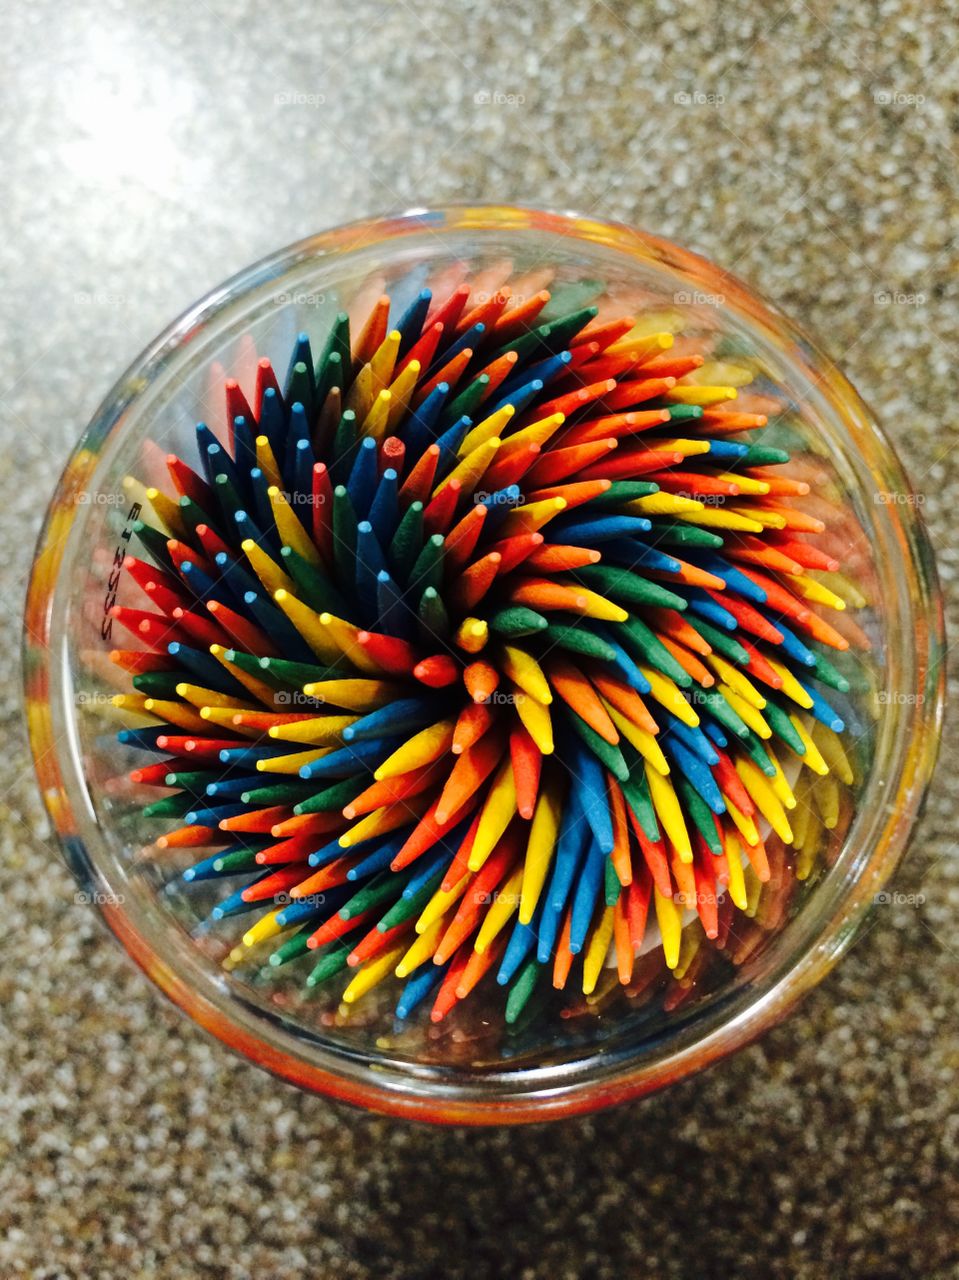 Spiral Toothpicks. A photo of colorful, vibrant toothpicks in a cup.